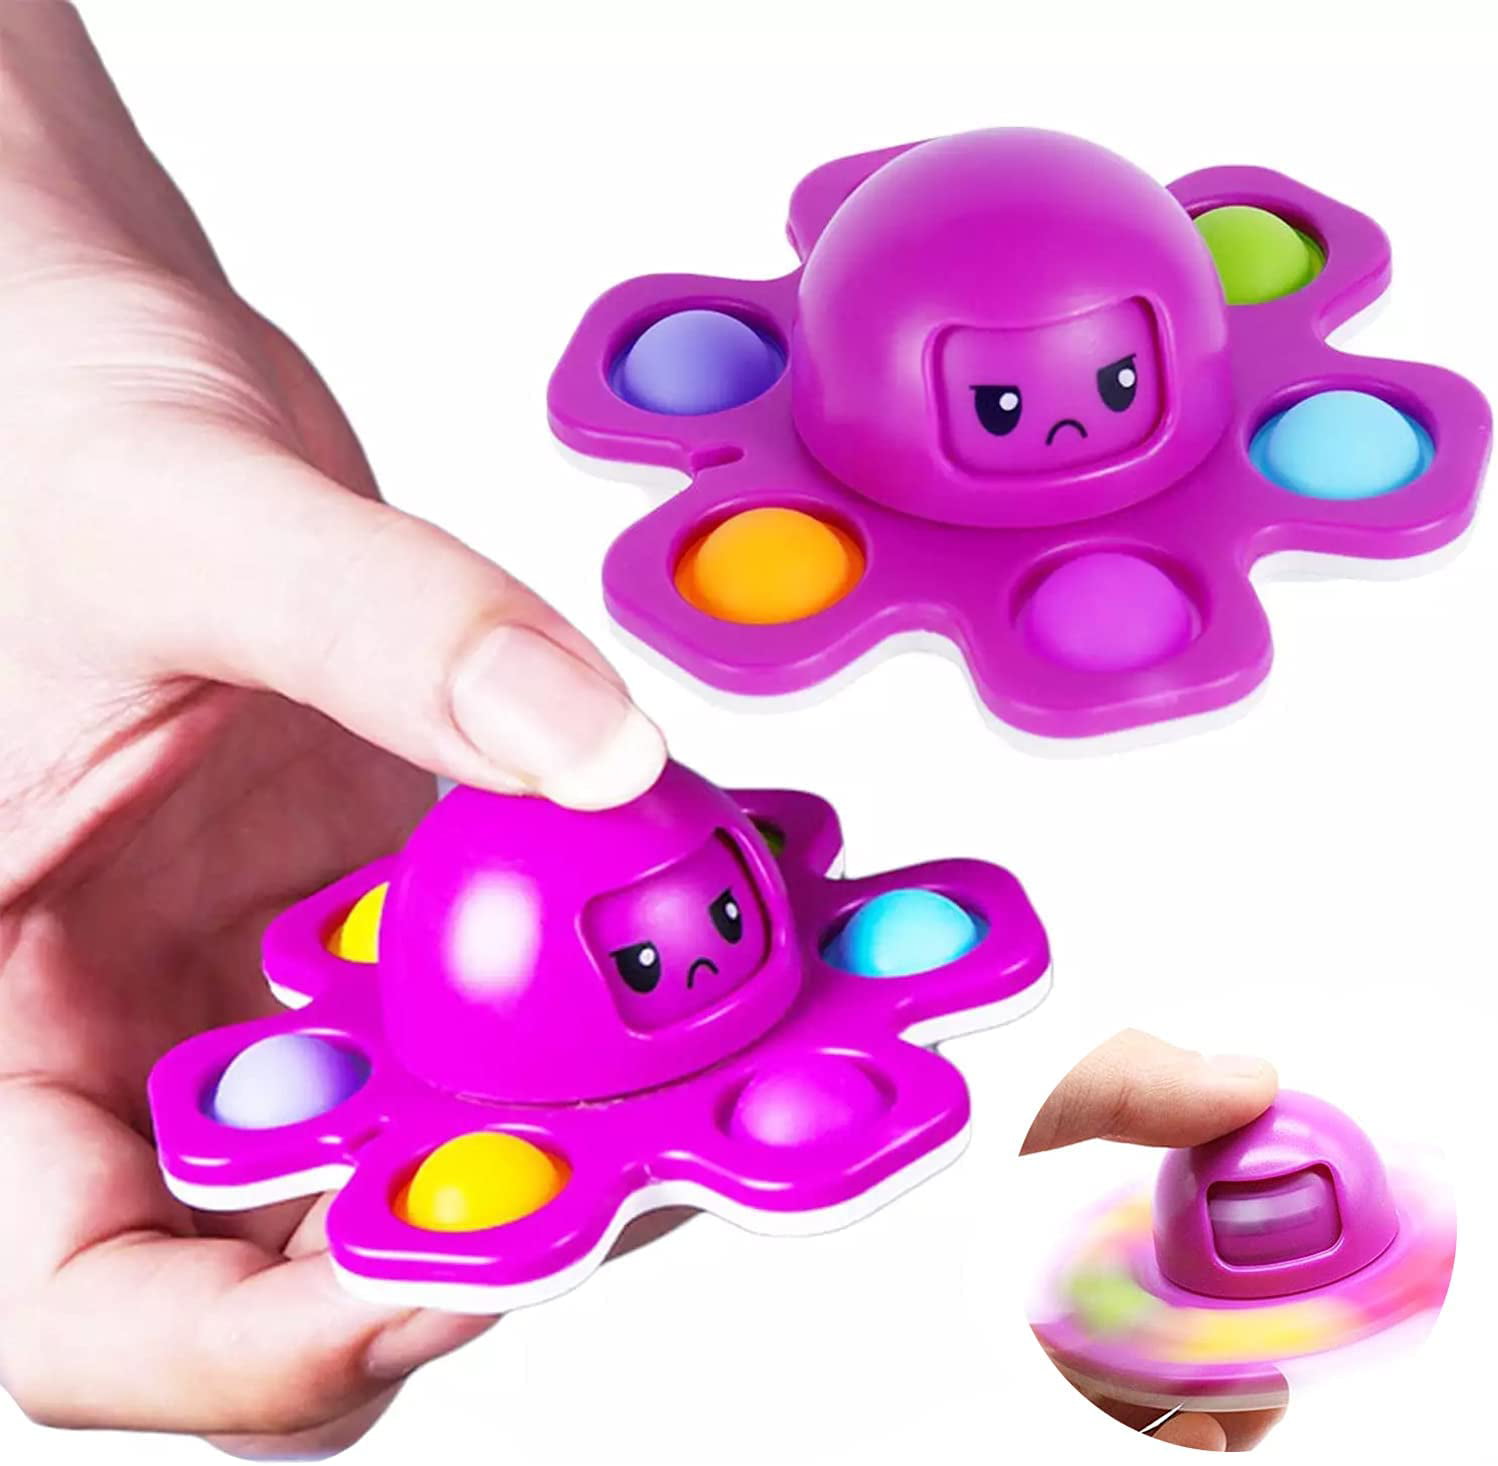 5 Pack of Fidget Toys, Octopus Push Bubble Fidget Spinner, Face-Changing  Octopus with Soft Bubbles, Squeeze Sensory Toy to Relieve Emotional Stress  